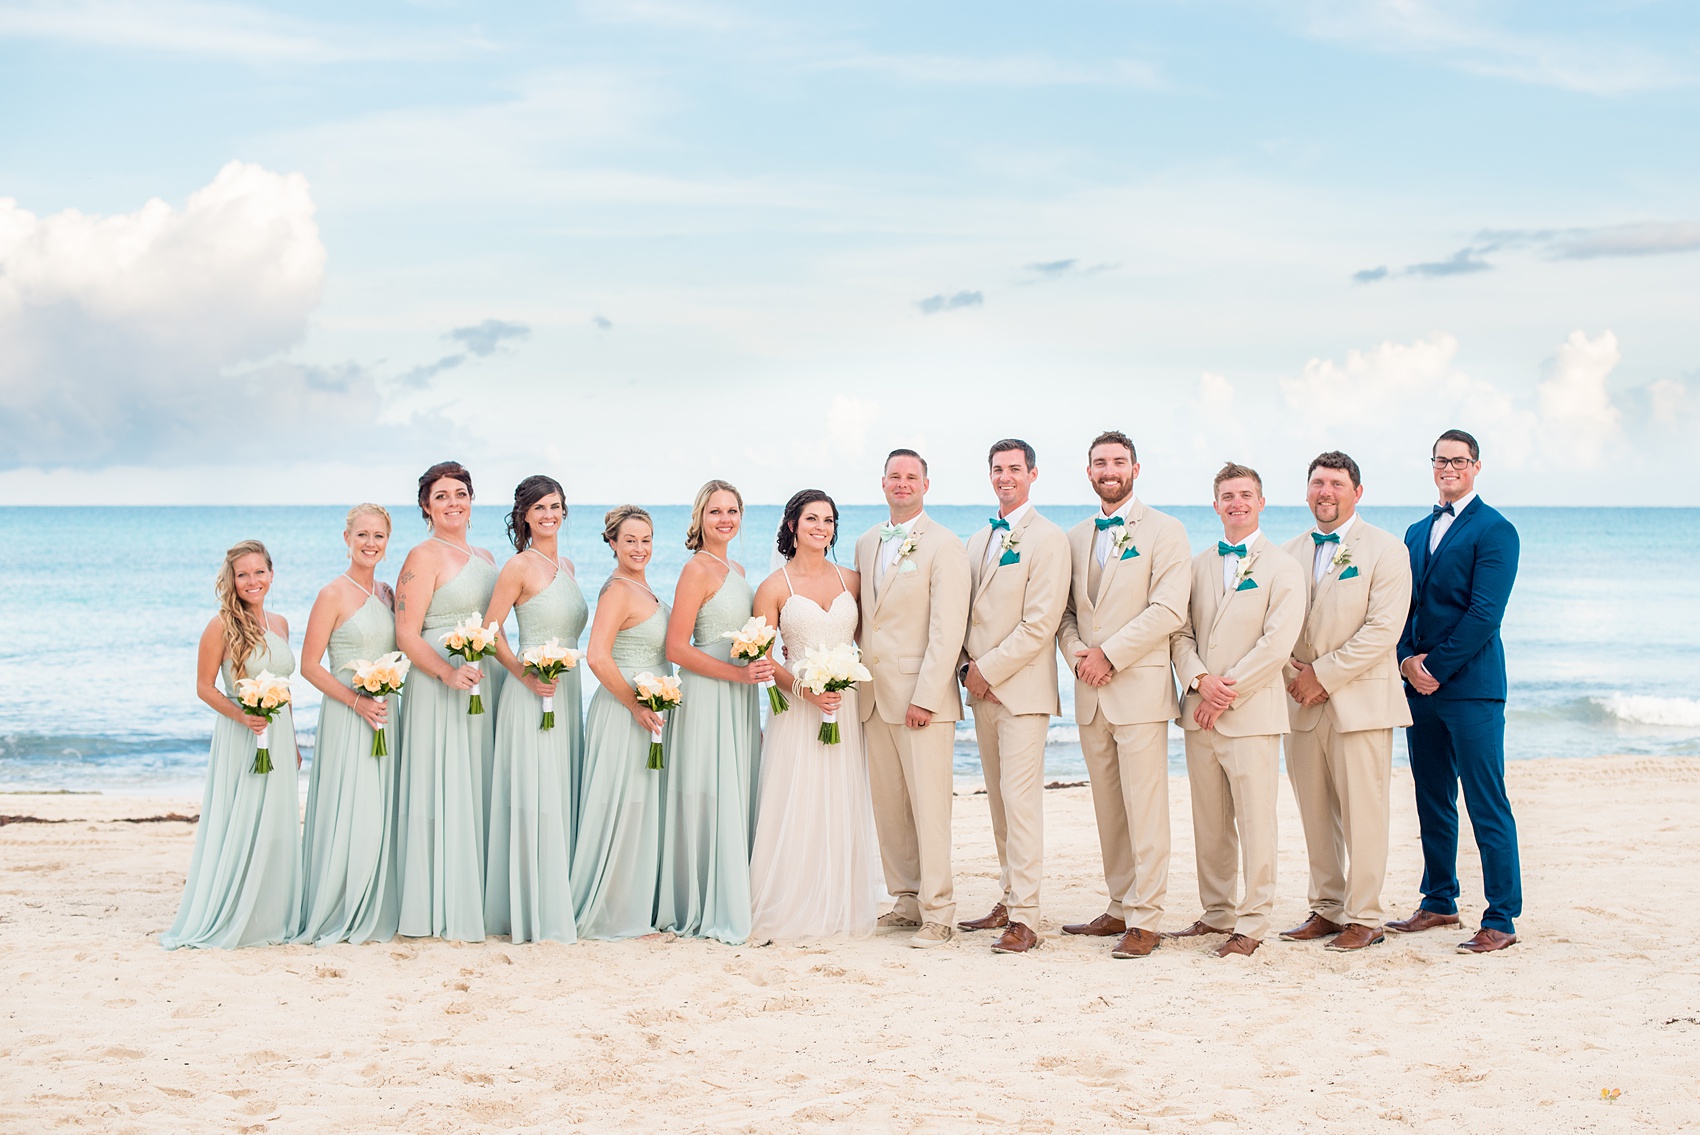 Mikkel Paige Photography photos from a wedding at Grand Paraiso, Mexico, Playa del Carmen Iberostar resort. Picture of the bridal party in mint green gowns and groomsmen in tan suits on the beach.